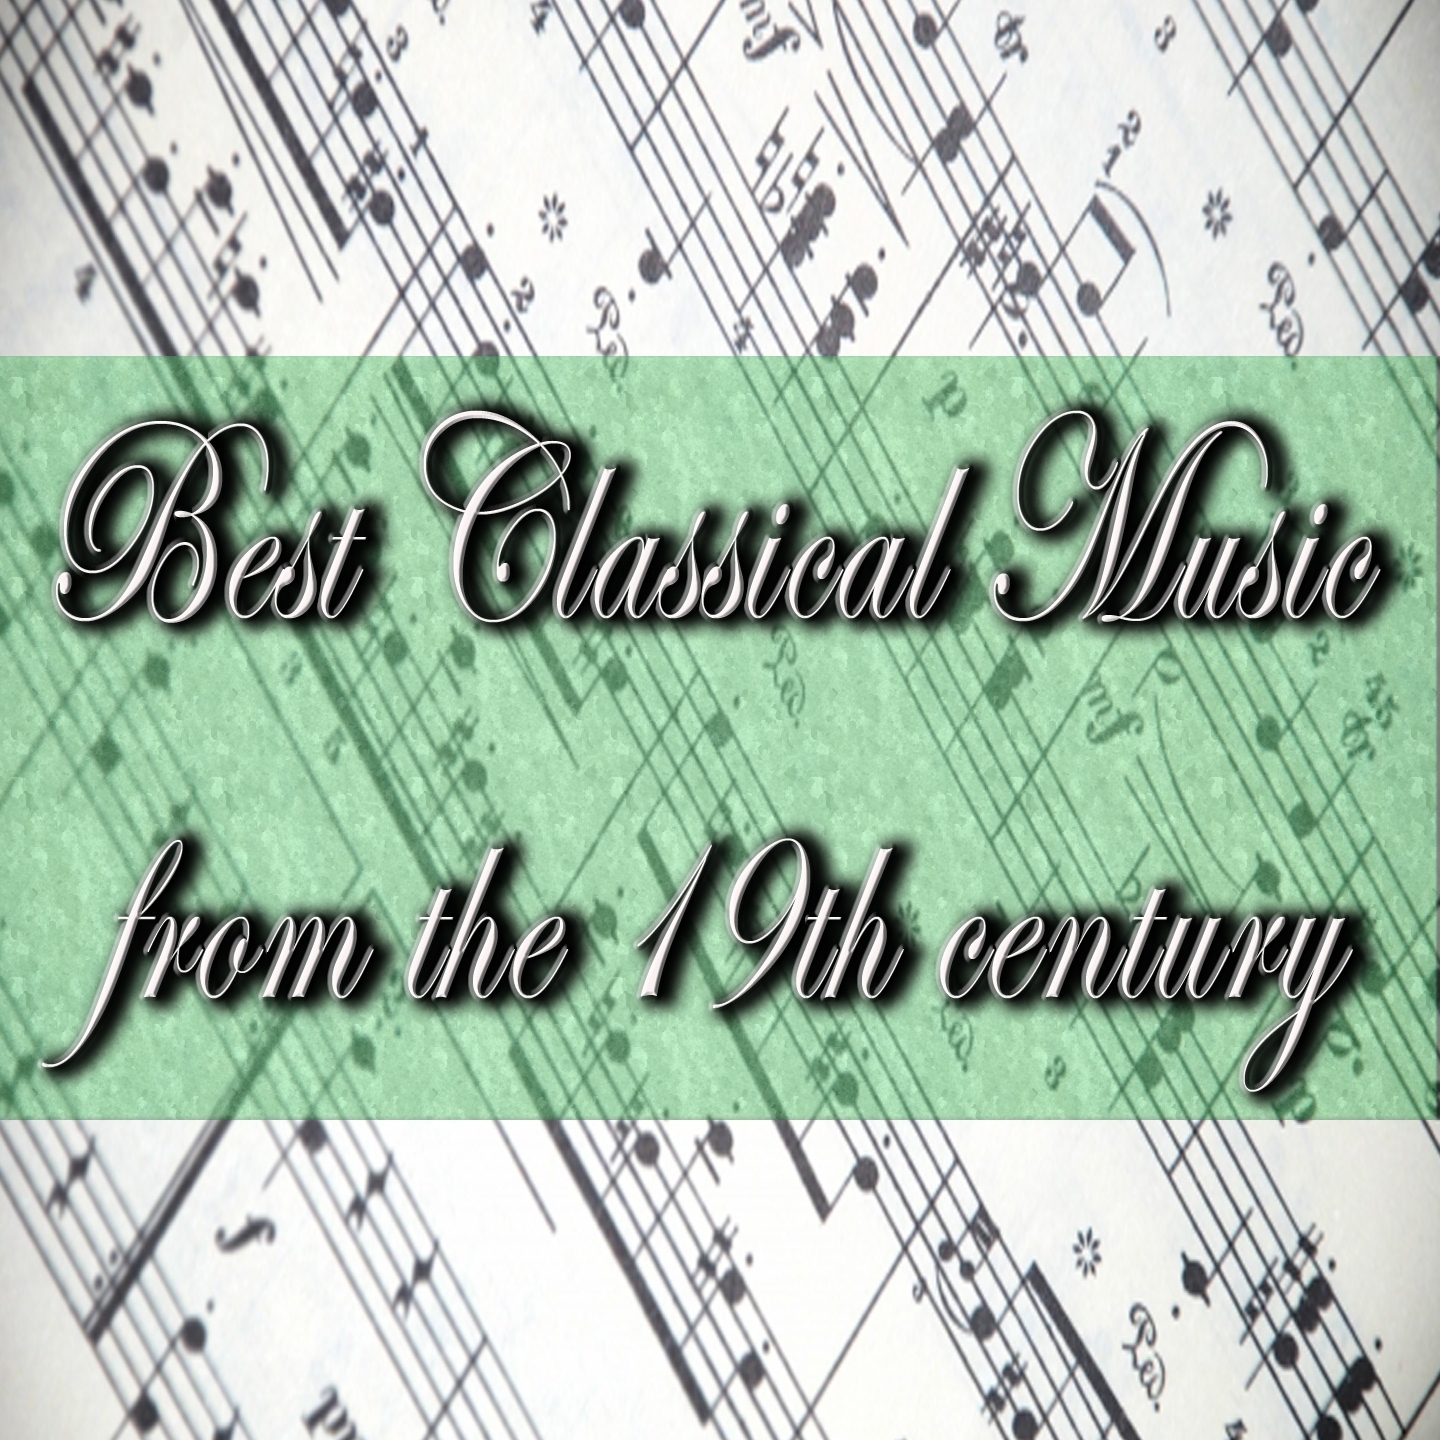 Best Classical Music from the 19th Century